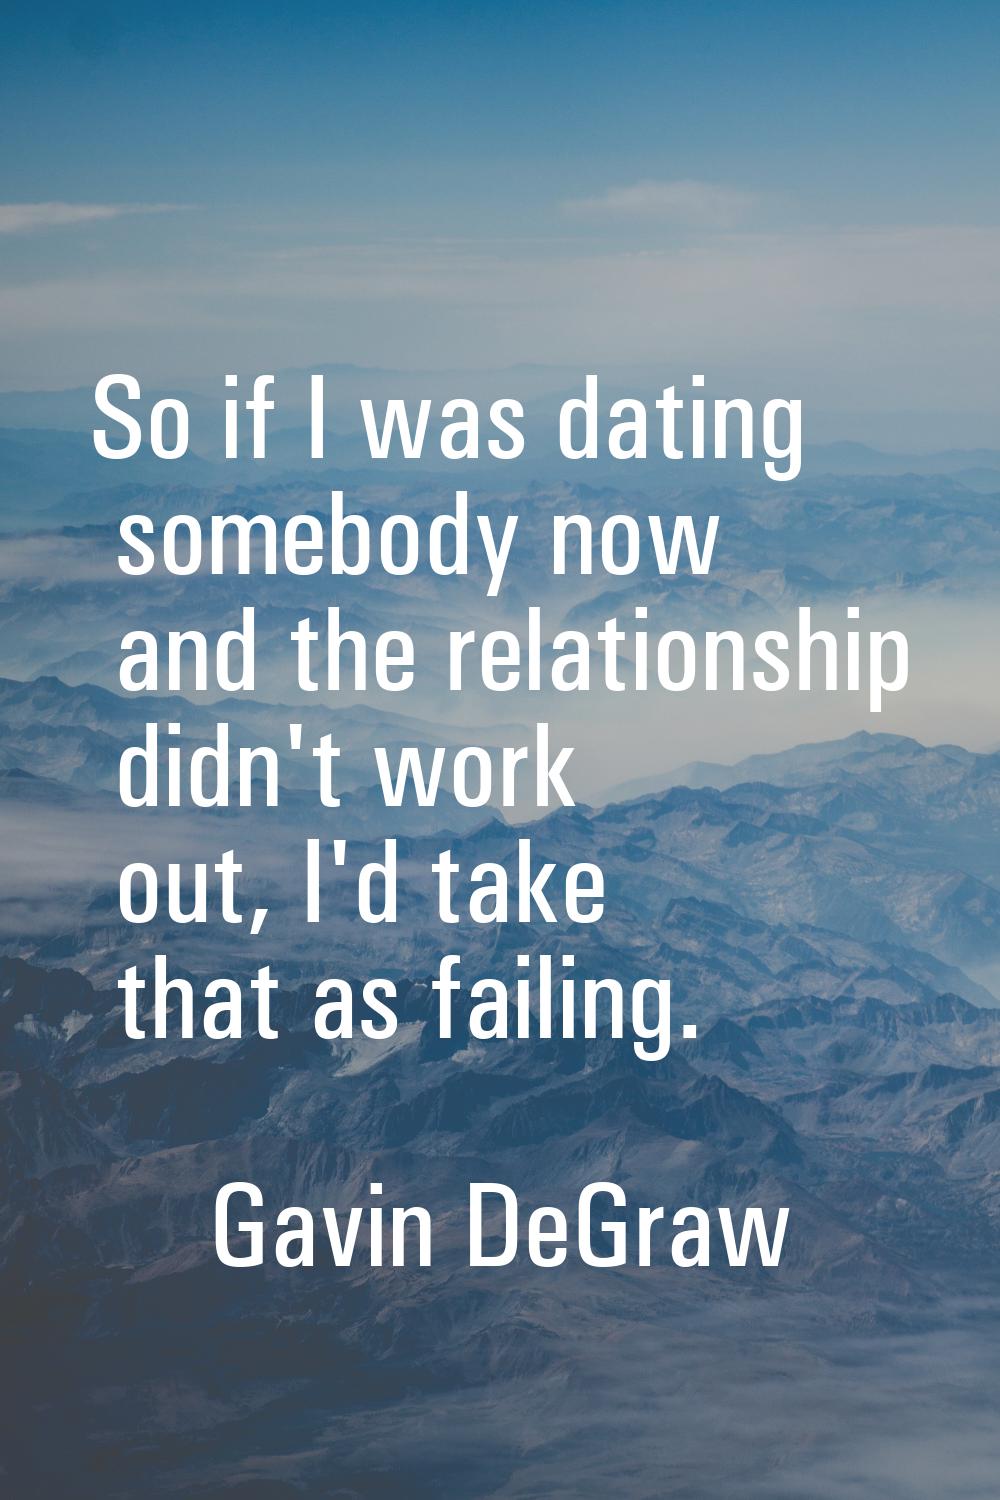 So if I was dating somebody now and the relationship didn't work out, I'd take that as failing.